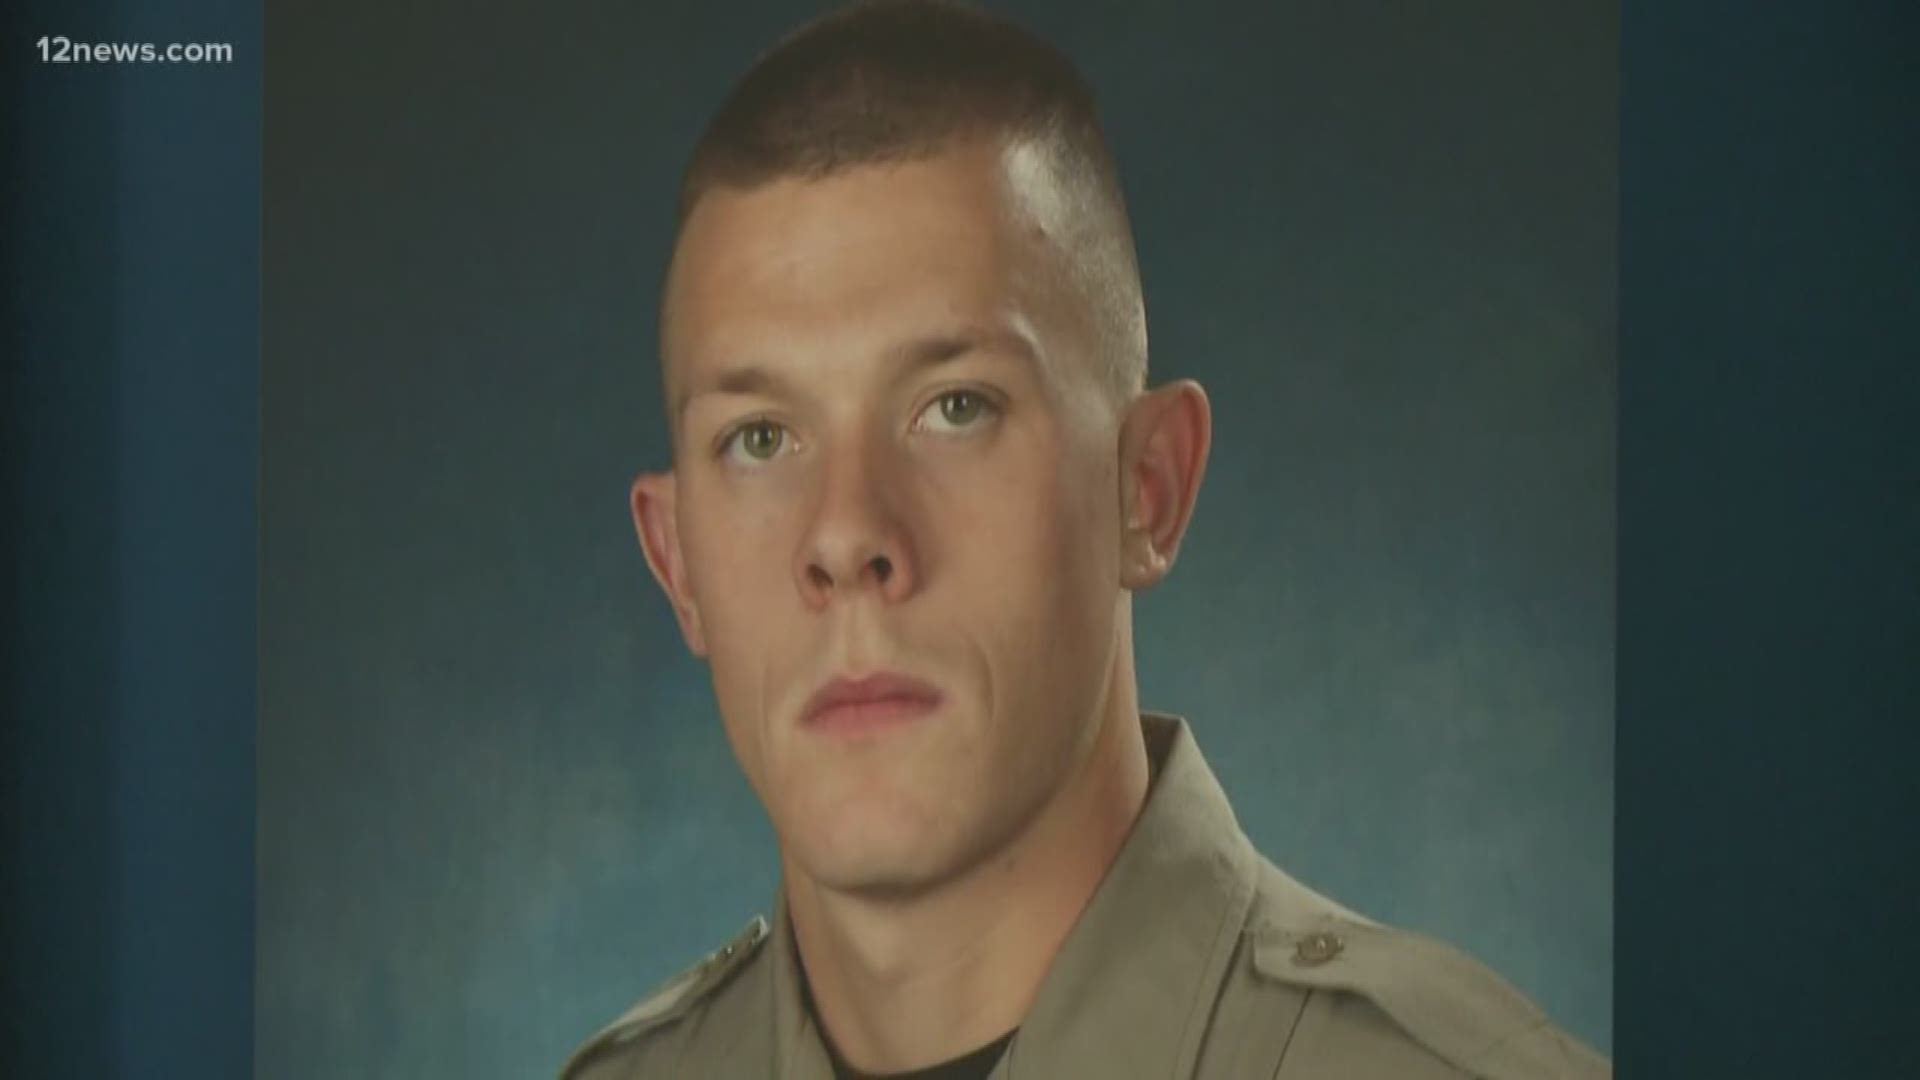 Story number nine in our countdown of the top 18 stories of 2018 is about the shocking loss of DPS Trooper Tyler Edenhofer. Tyler was days away from finishing his field training when he was gunned down by a suspect on I-10.